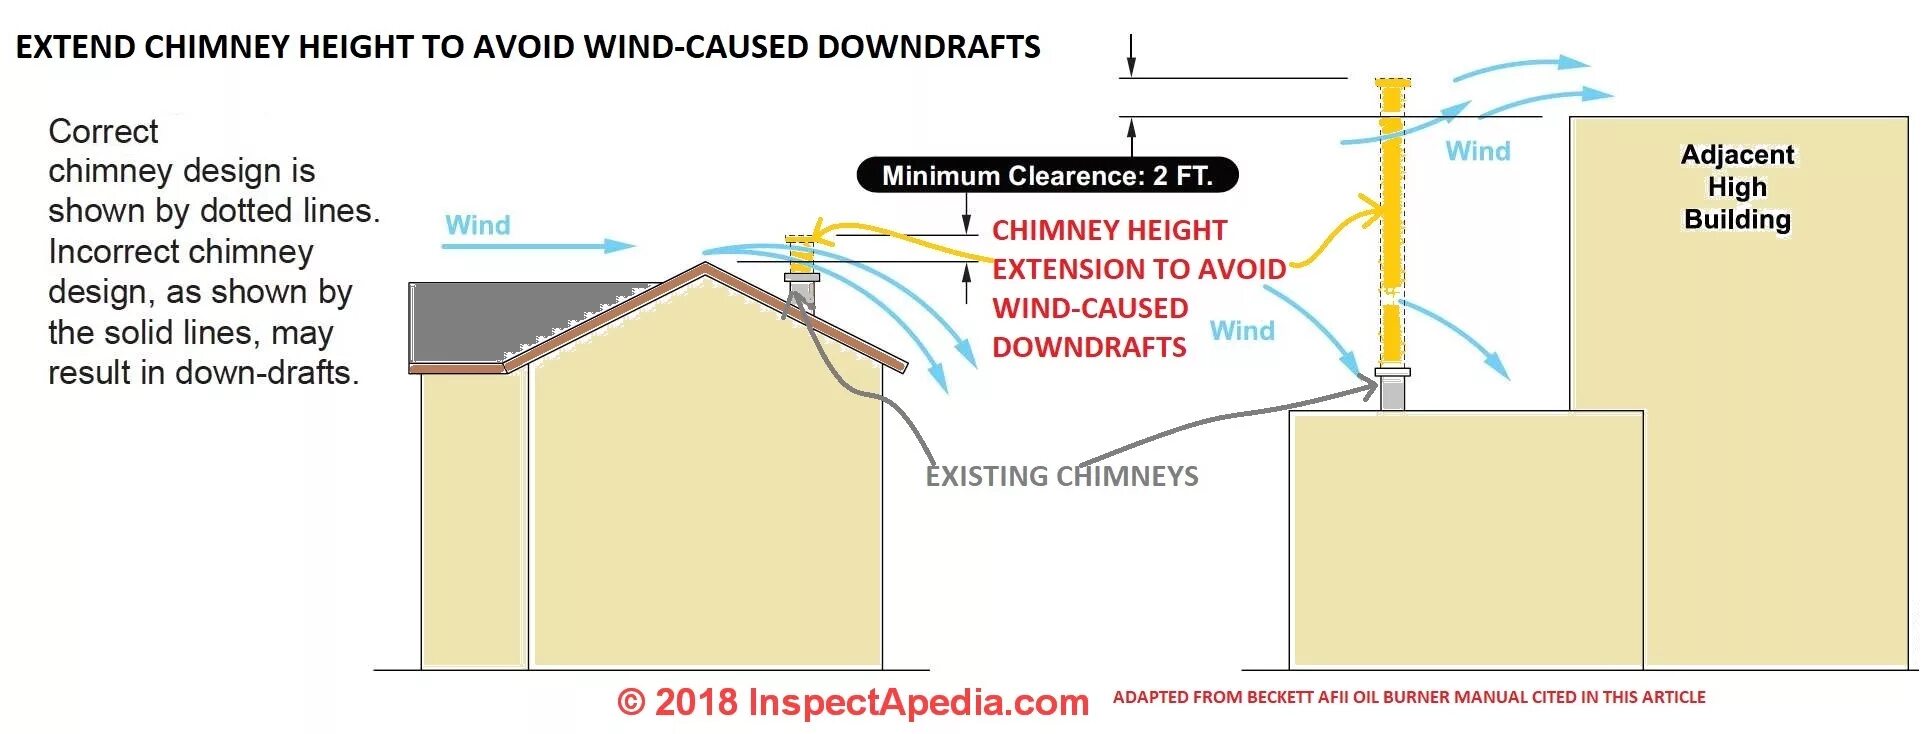 Min. Height of the Chimney. Chimney Design. Chimney Type Clearance. Collecting Heat from the Chimney. Chimneys перевод